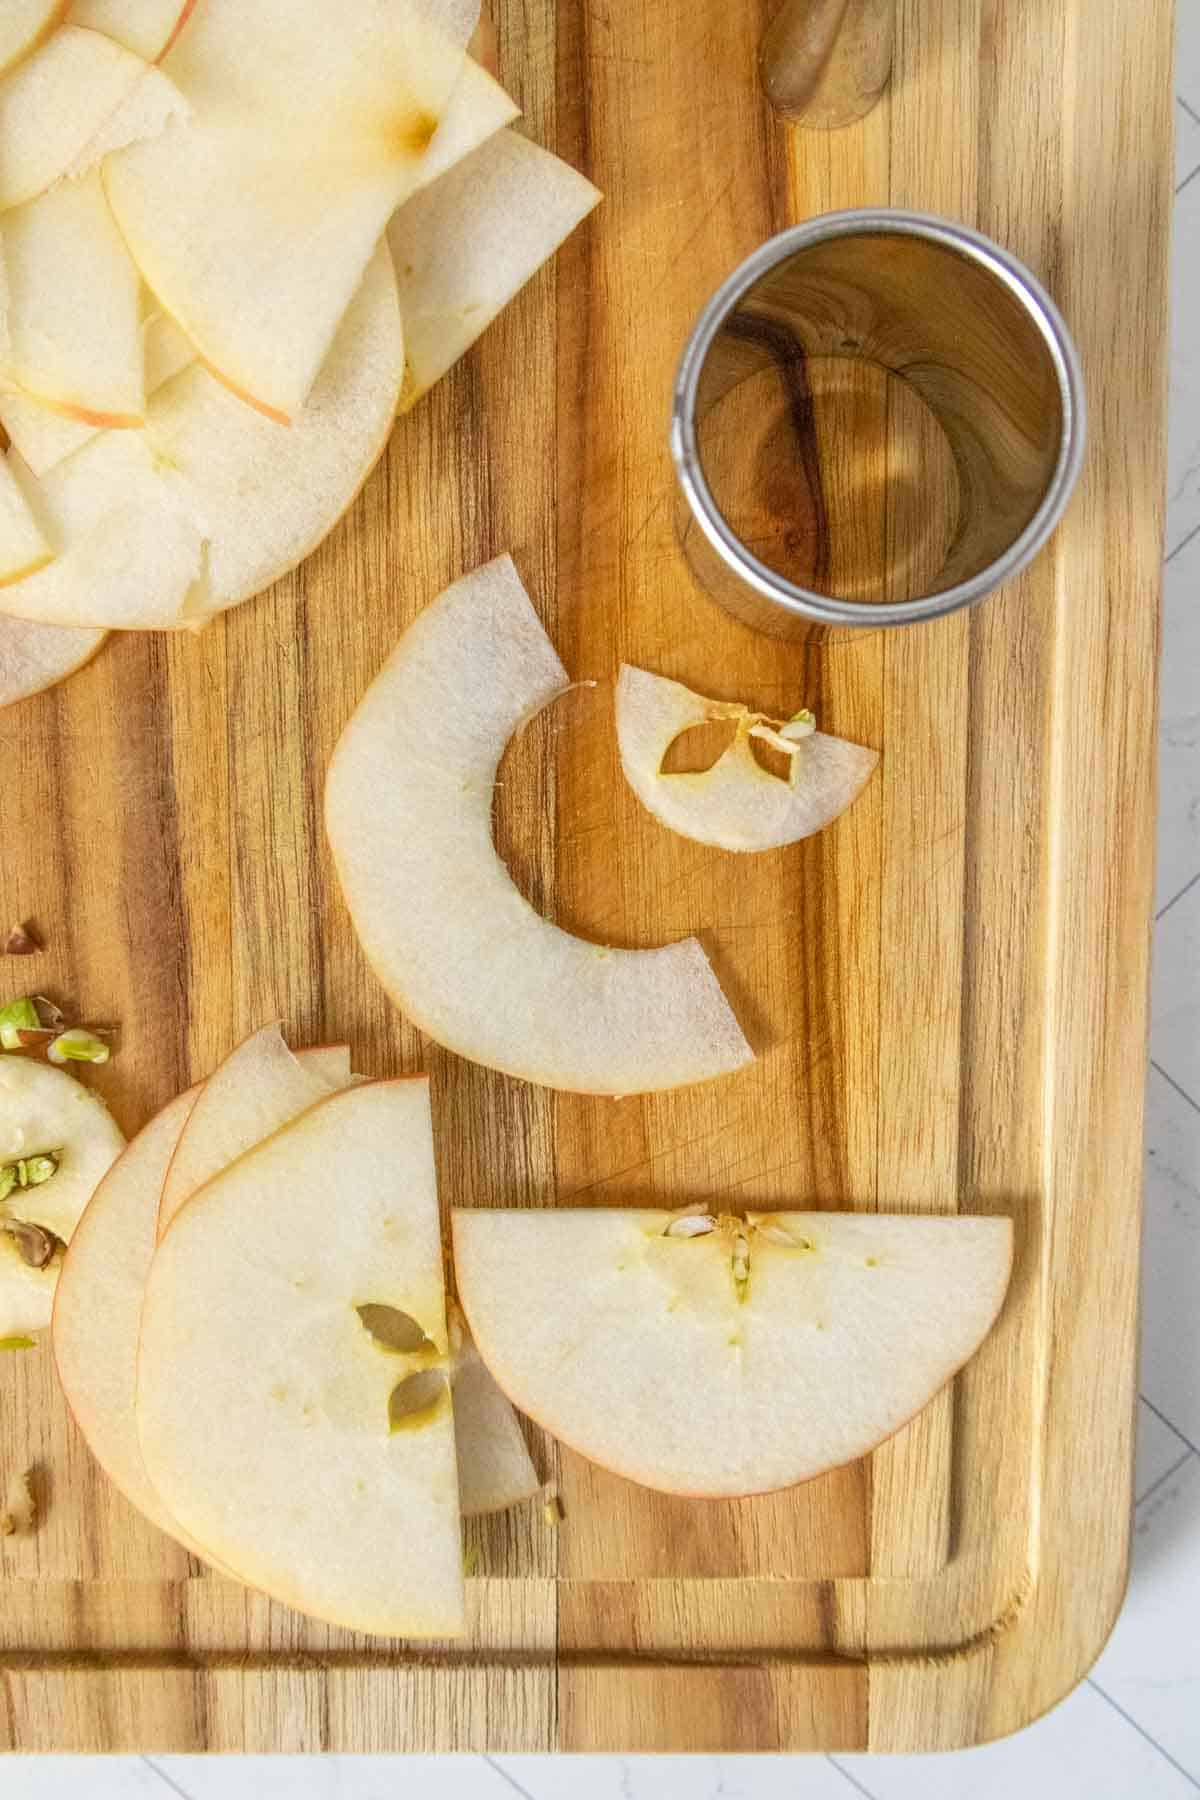 Sliced apples on a cutting board.